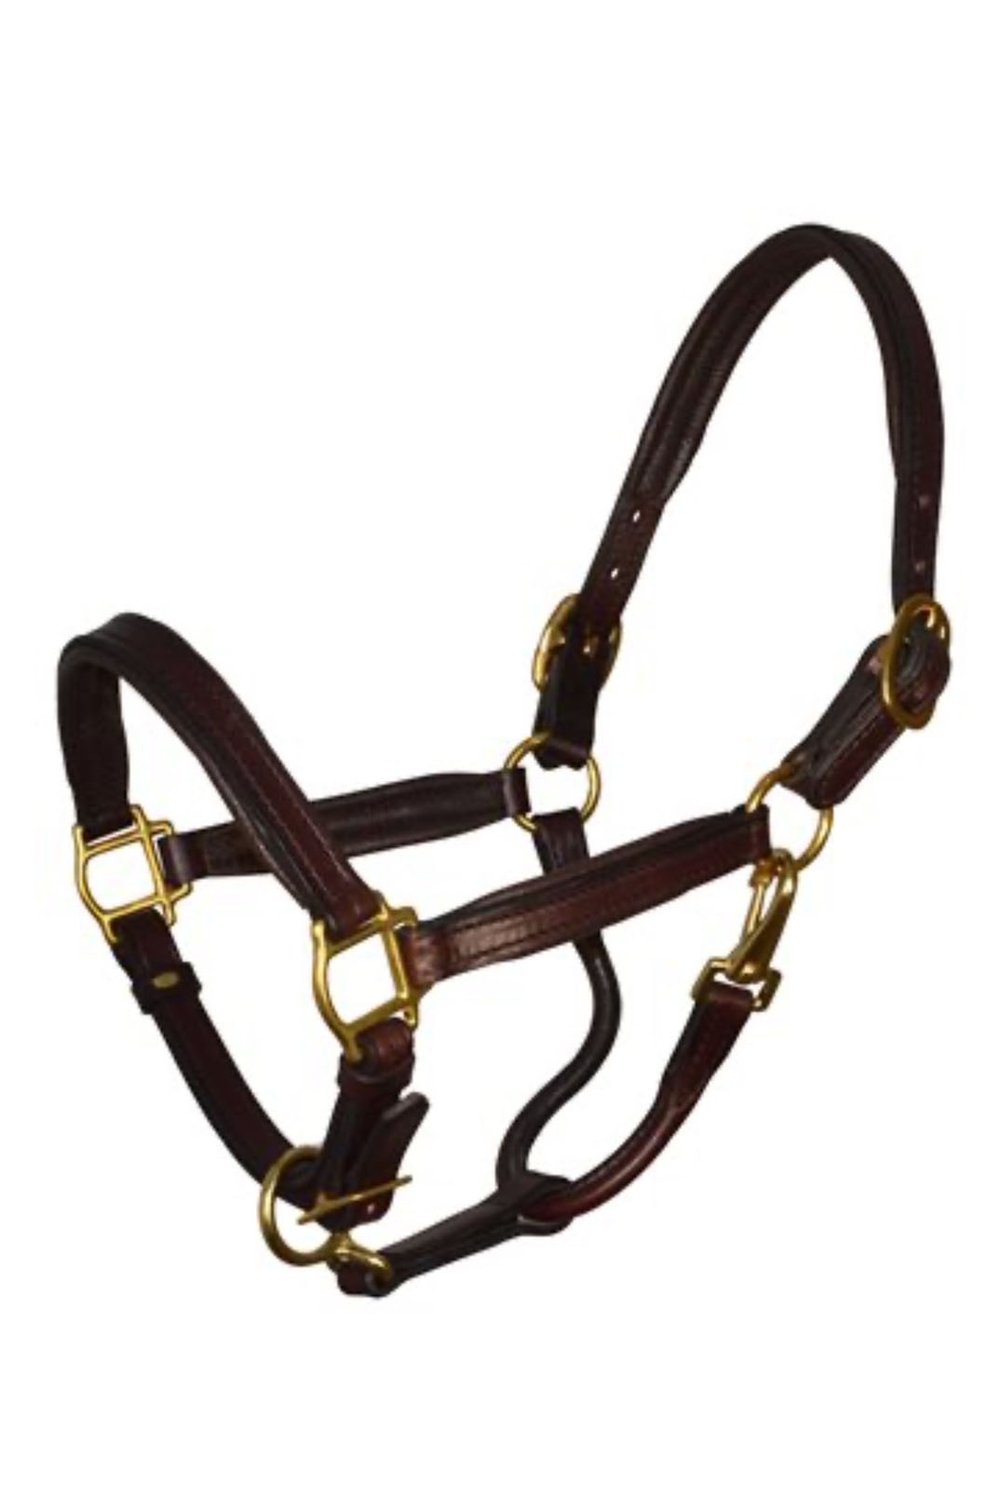 Perri's Padded Leather Halter In Havana & Brown - Size Horse — 2nd